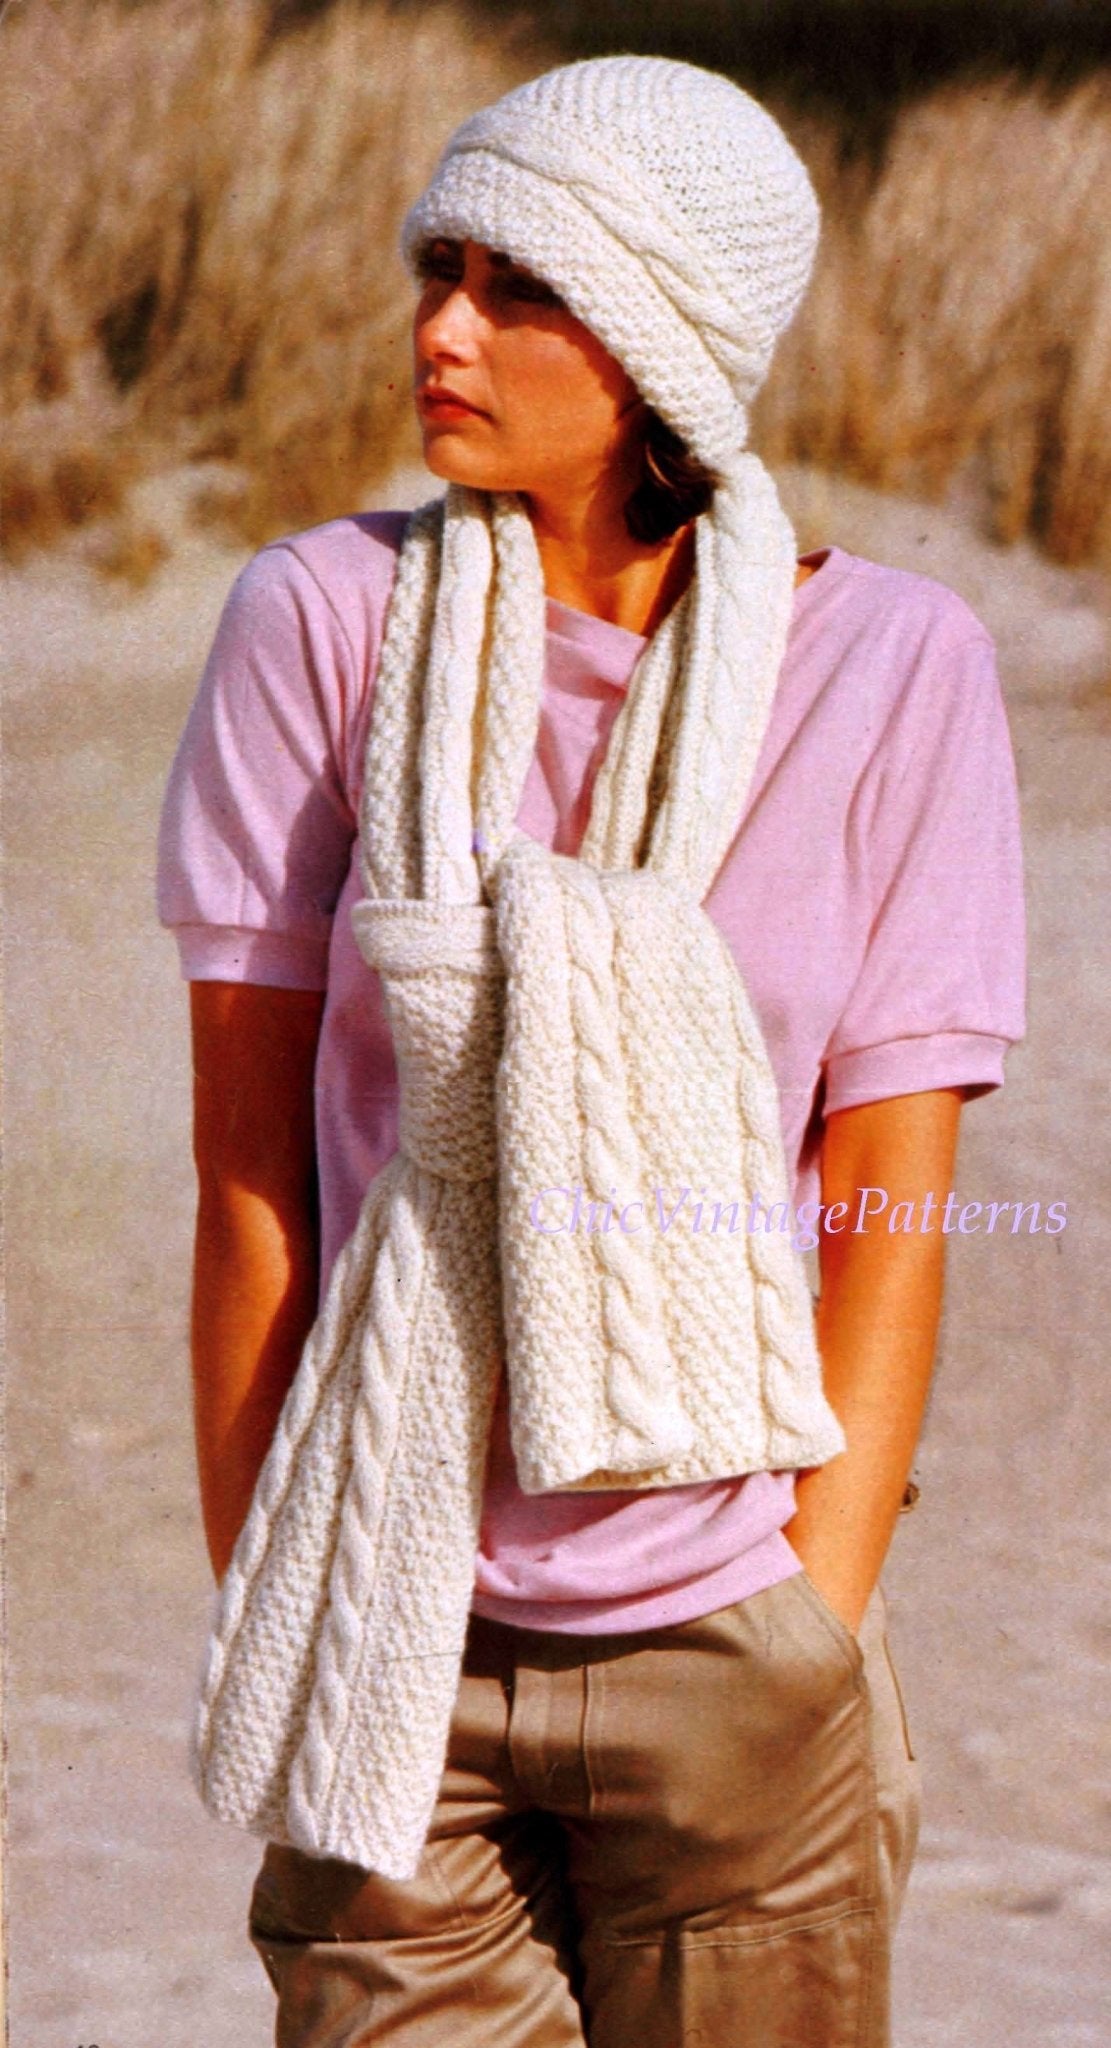 Knitted Hat and Scarf Pattern, Cable and Irish Moss Stitch, Instant Download